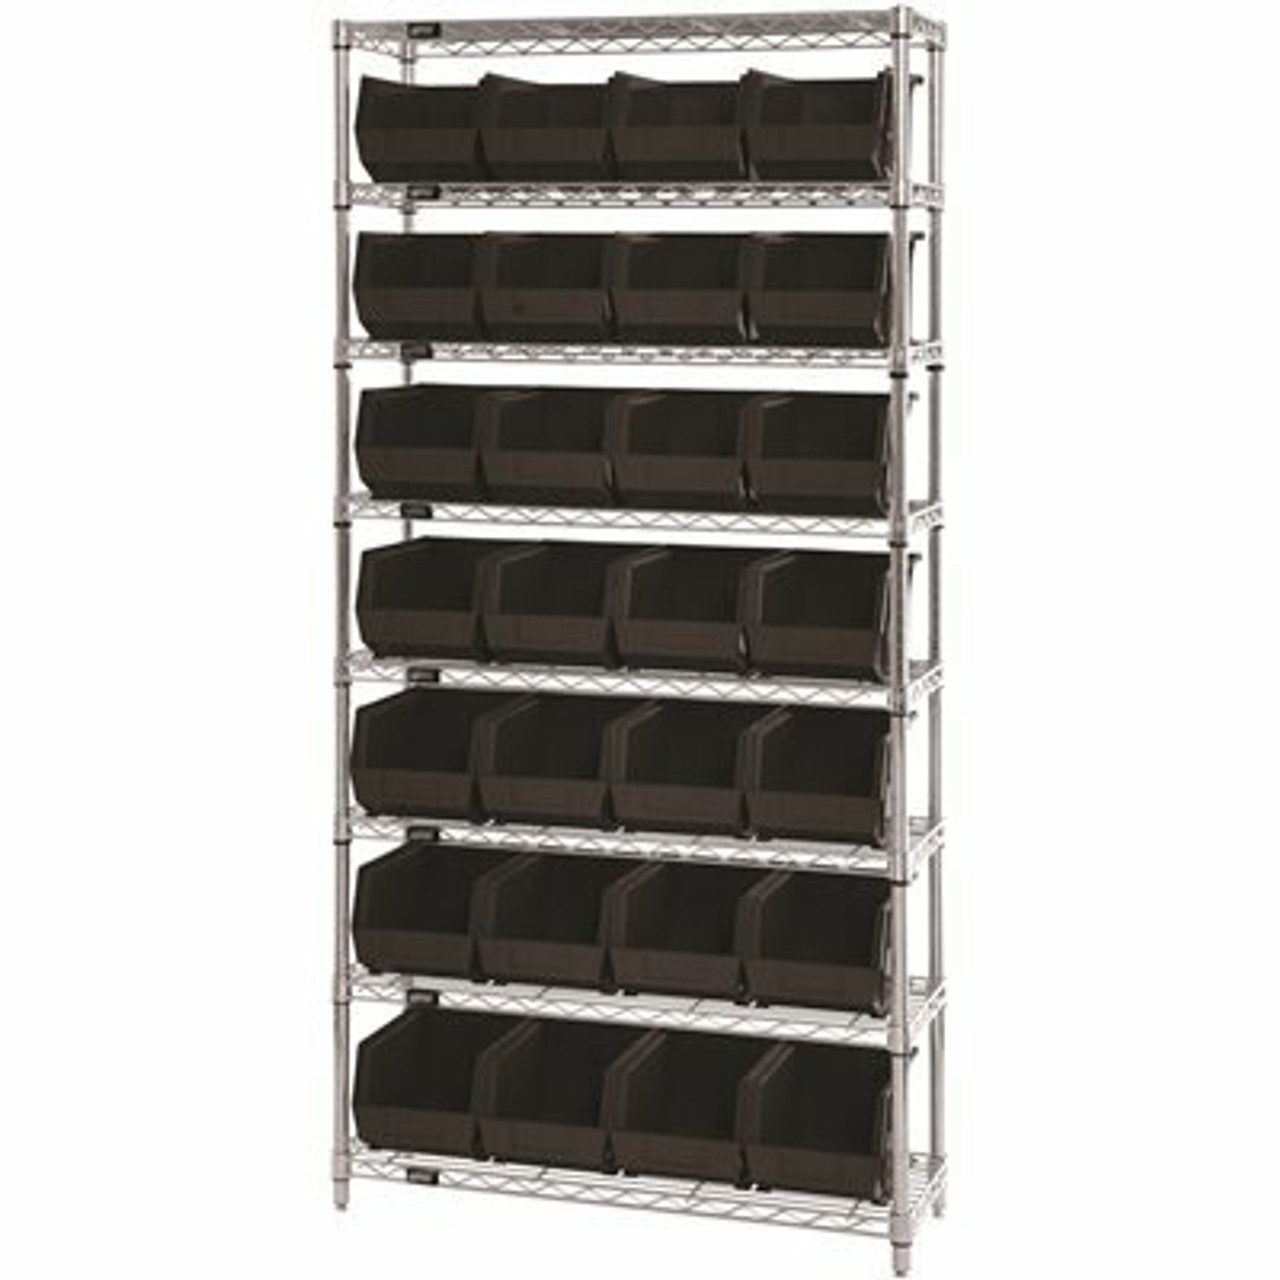 Quantum Storage Systems Giant Open Hopper 36 In. X 14 In. X 74 In. Wire Chrome Heavy Duty 8-Tier Industrial Shelving Unit - 308241556